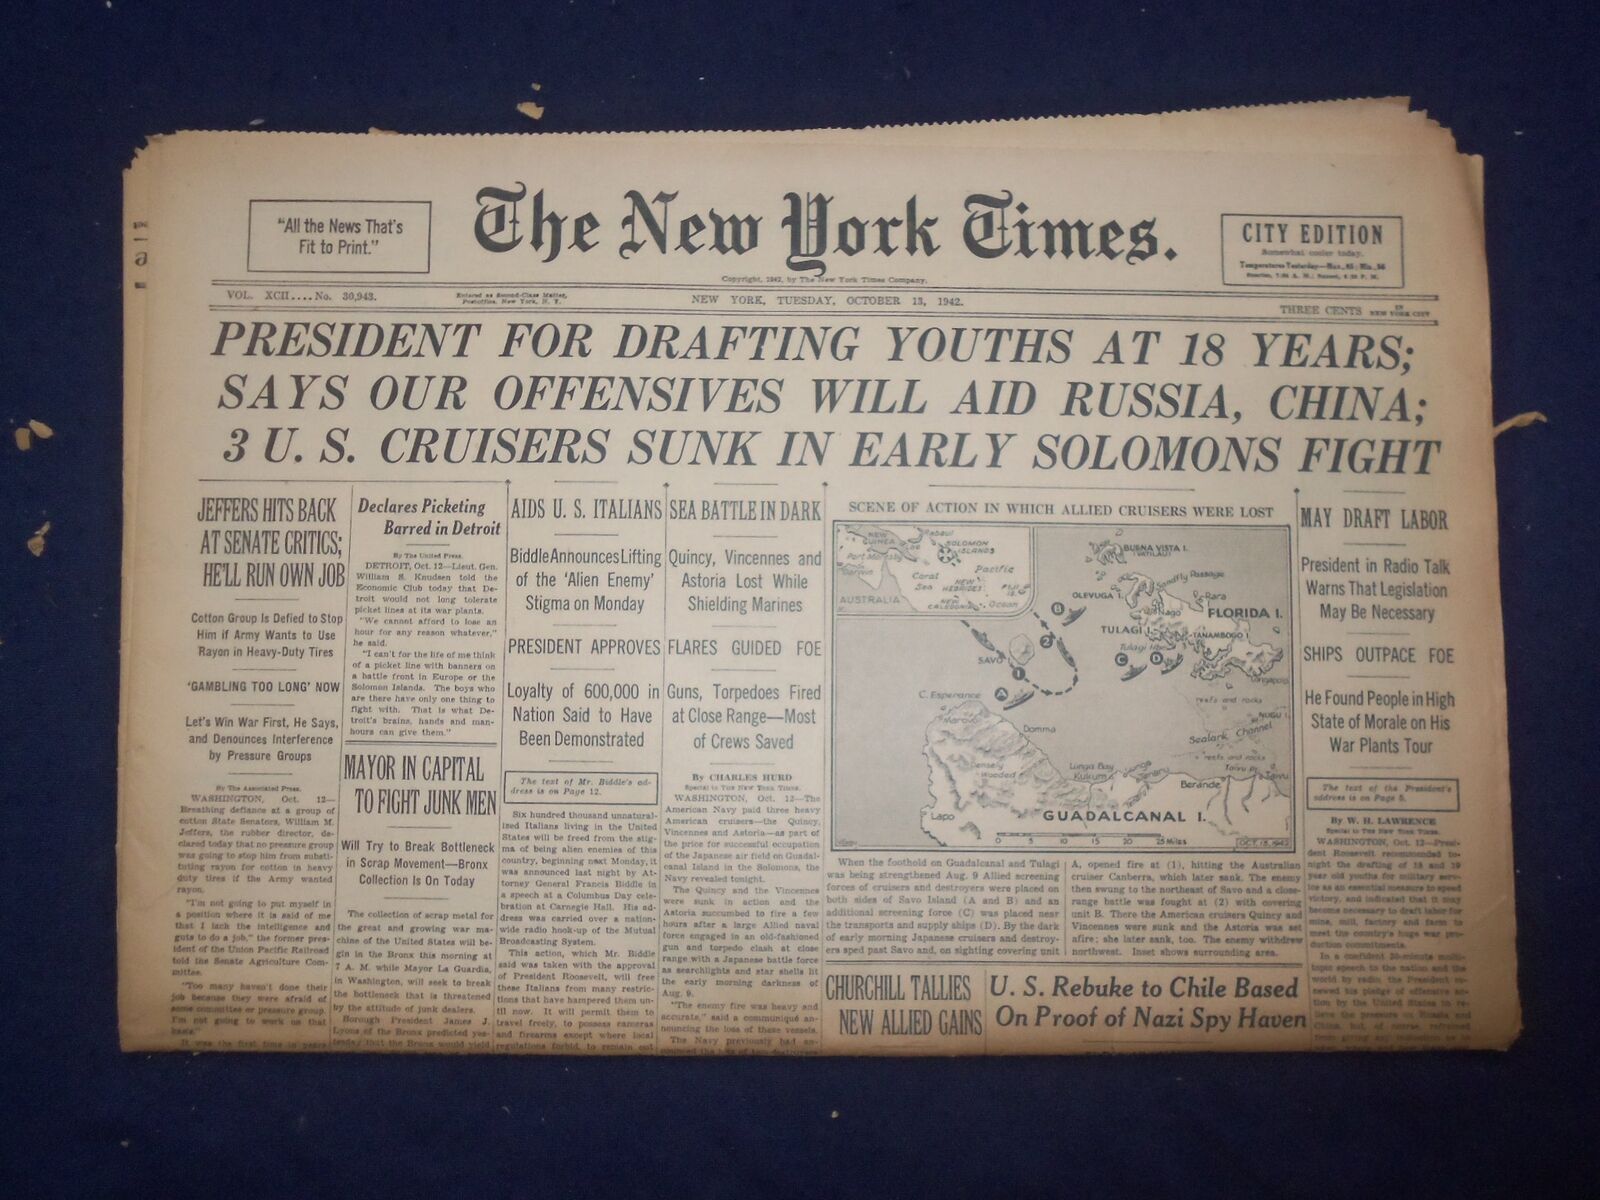 1942 OCT 13 NEW YORK TIMES - PRESIDENT FOR DRAFTING YOUTHS AT 18 YEARS - NP 6509